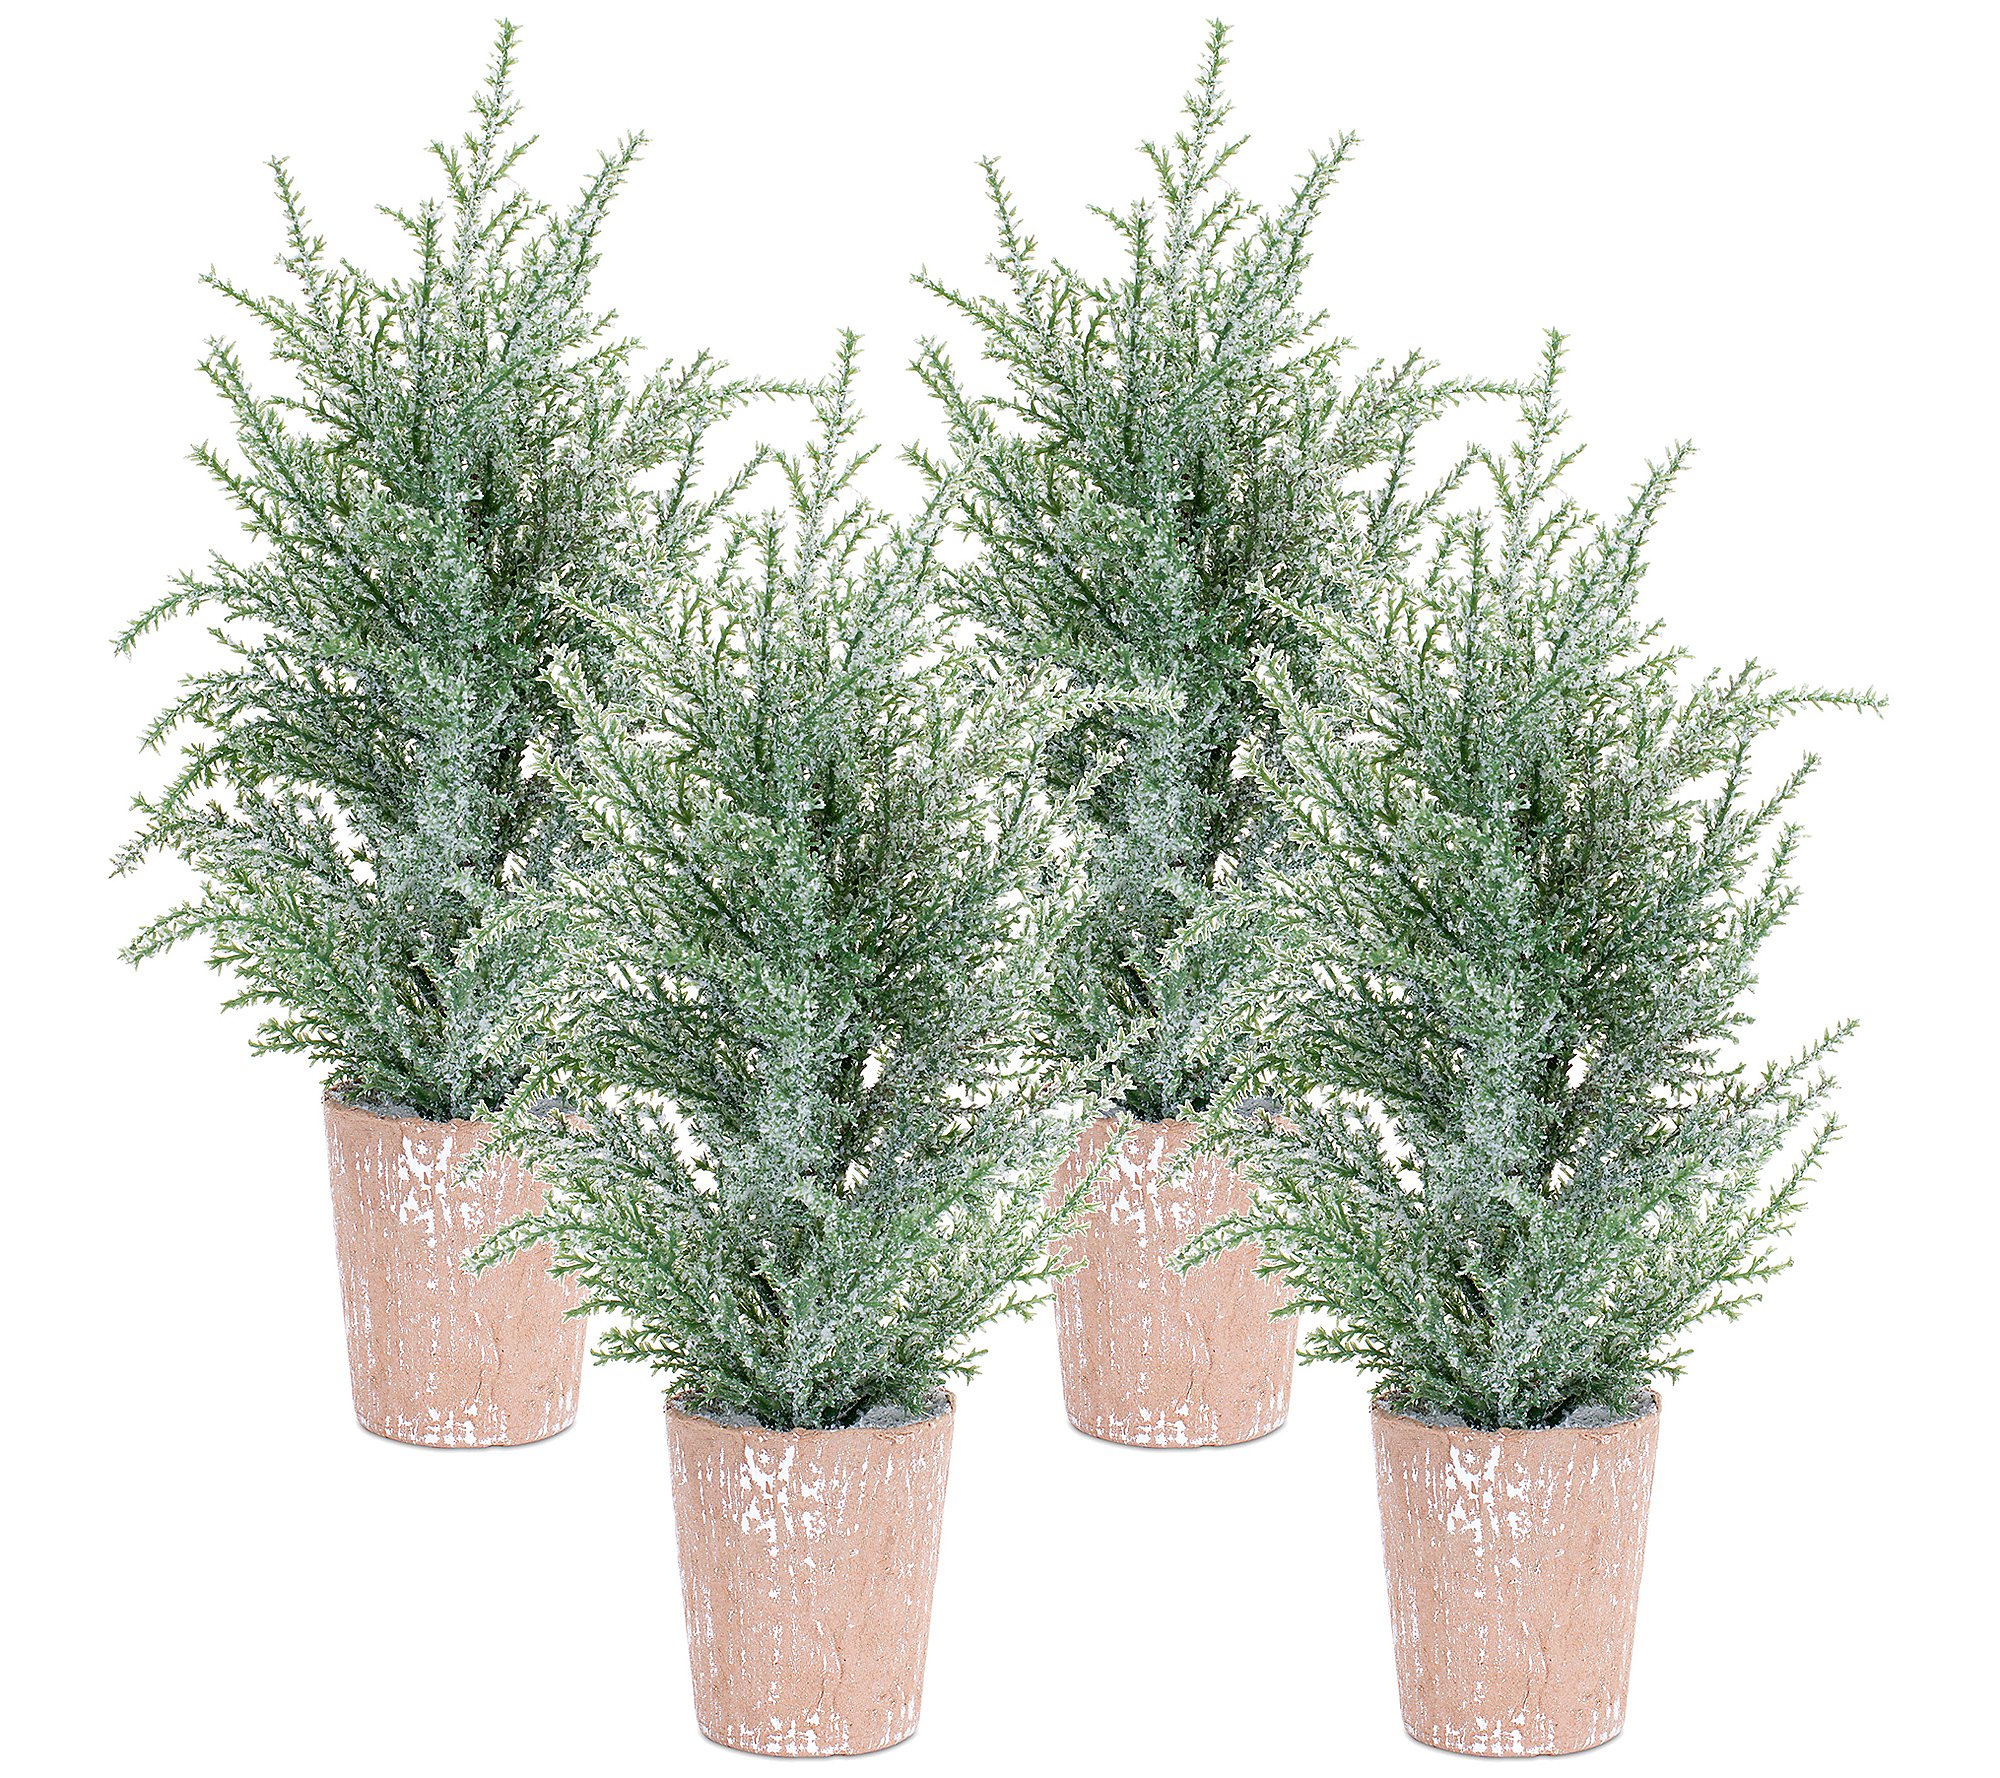 Melrose Frosted Holiday Pine Tree in Paper Pot Set of 4)